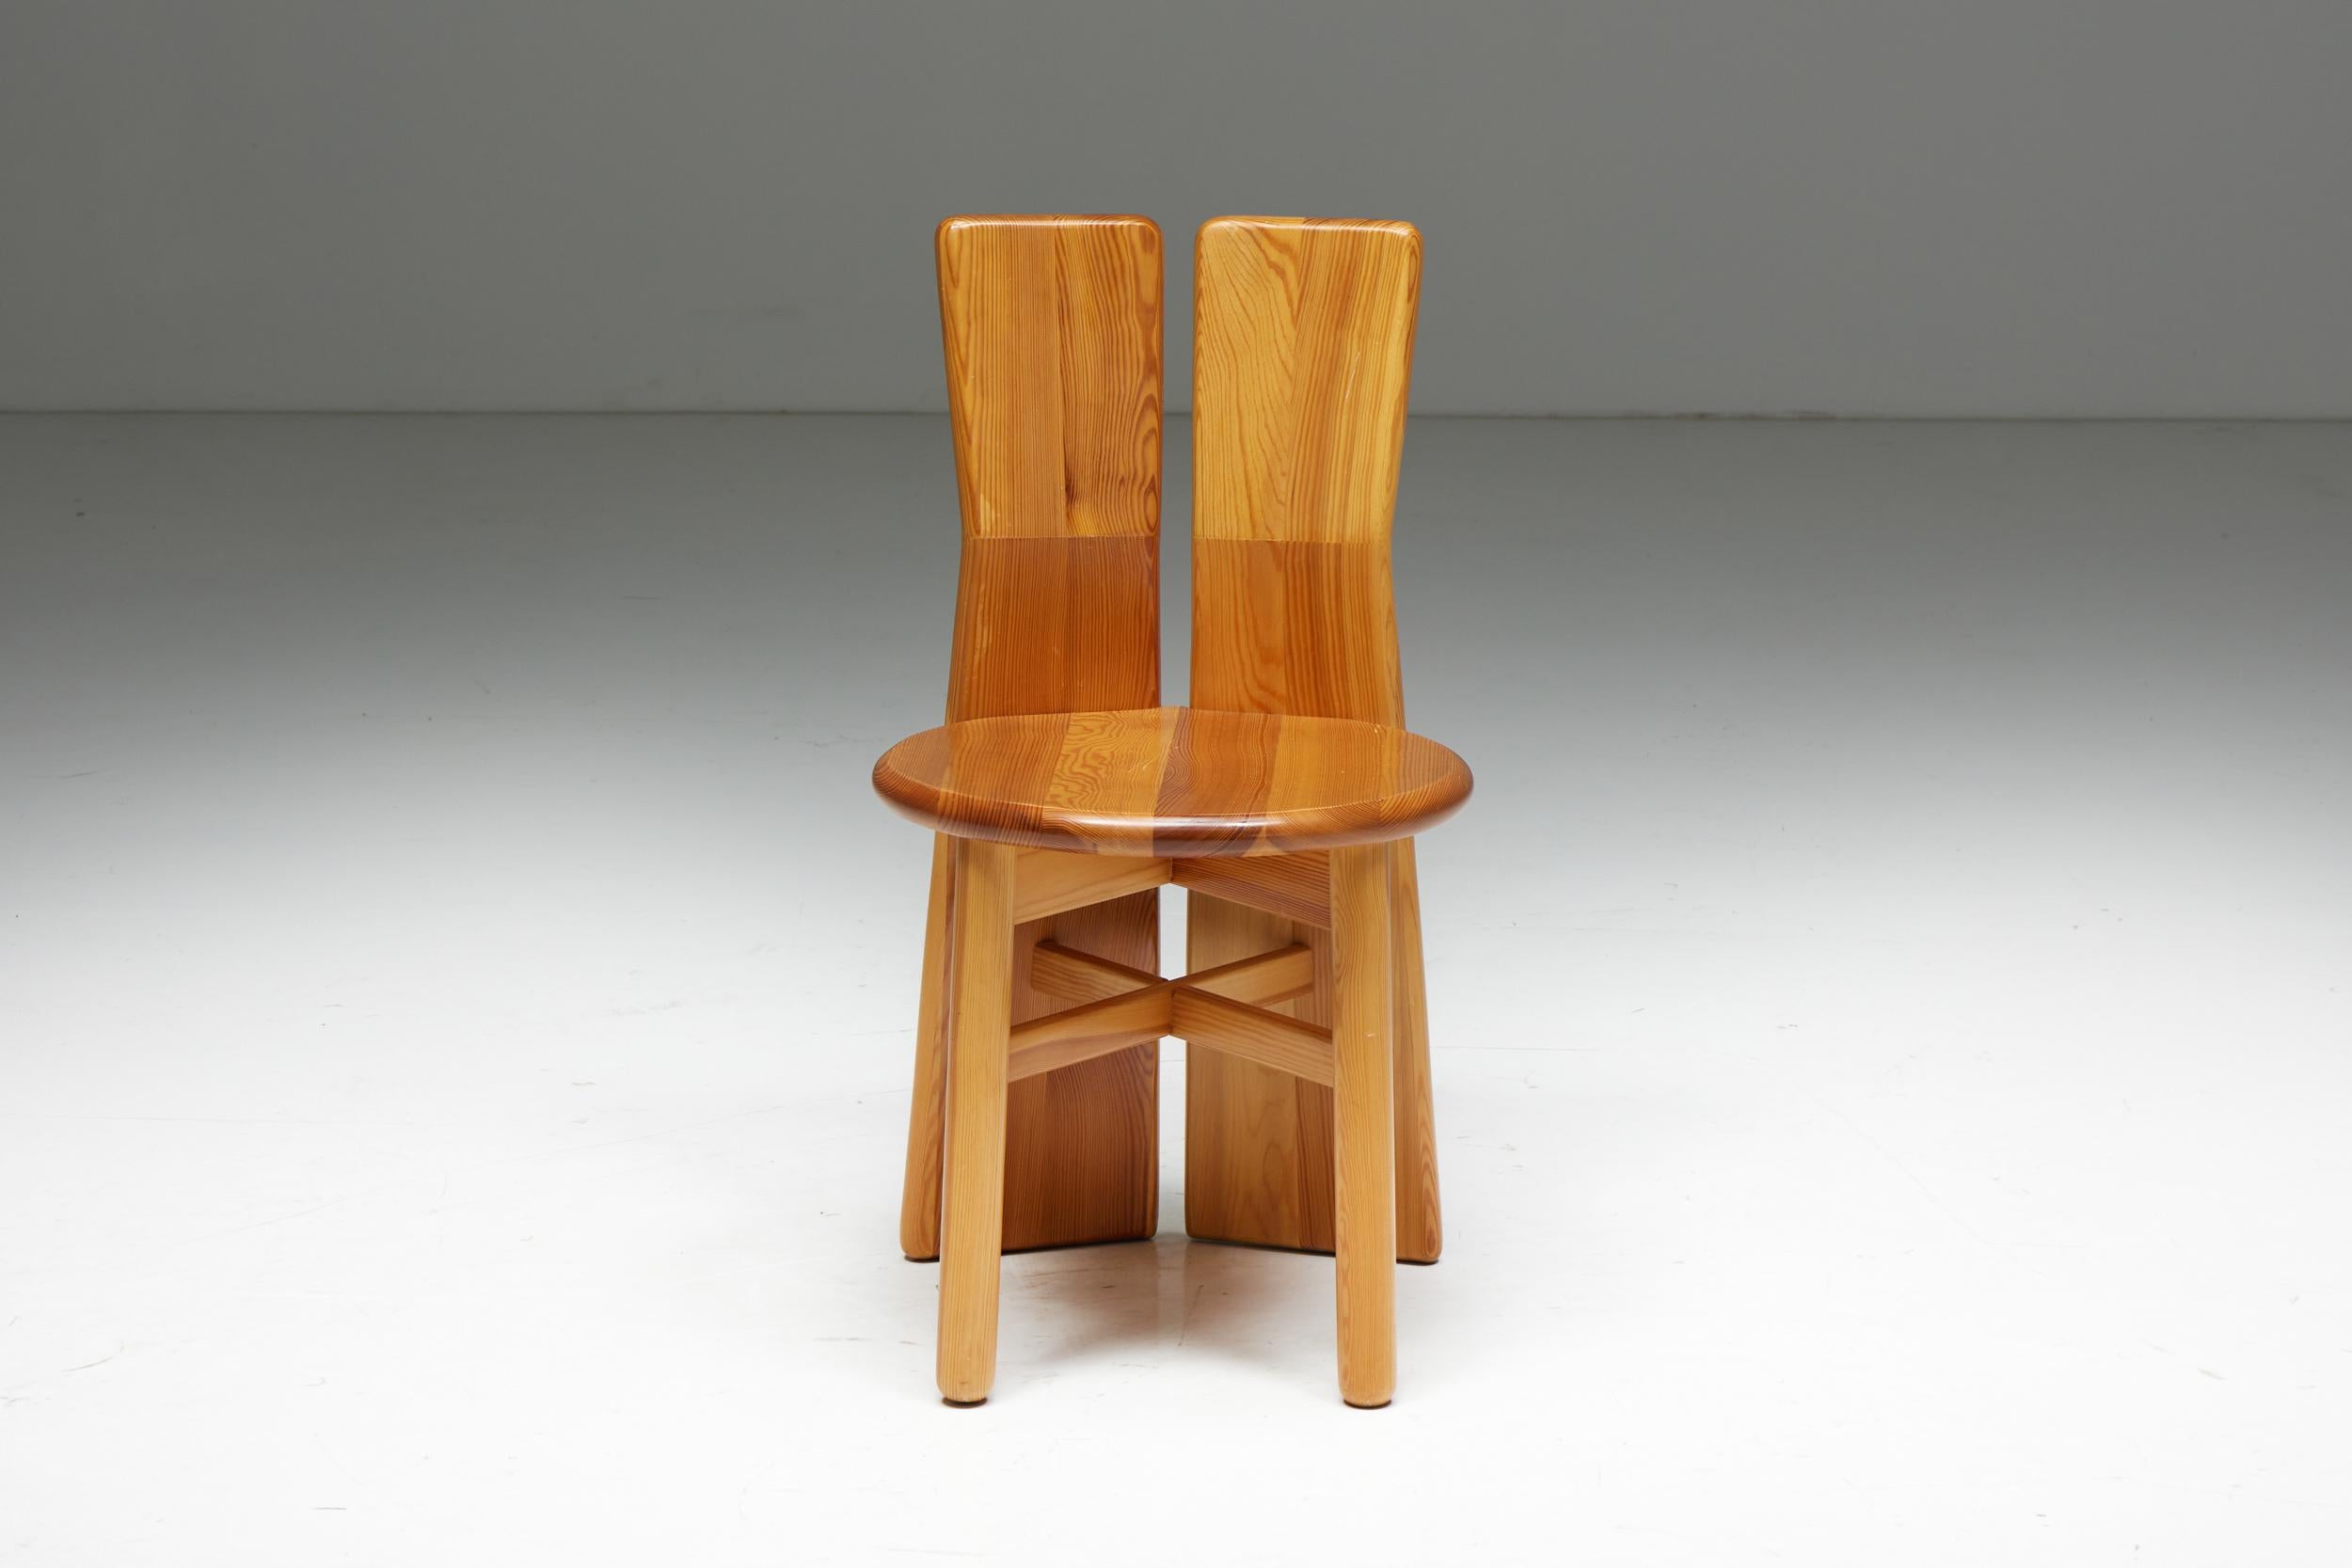 Italian Brutalist Pine Dining Chairs, Italy, 1970s For Sale 7